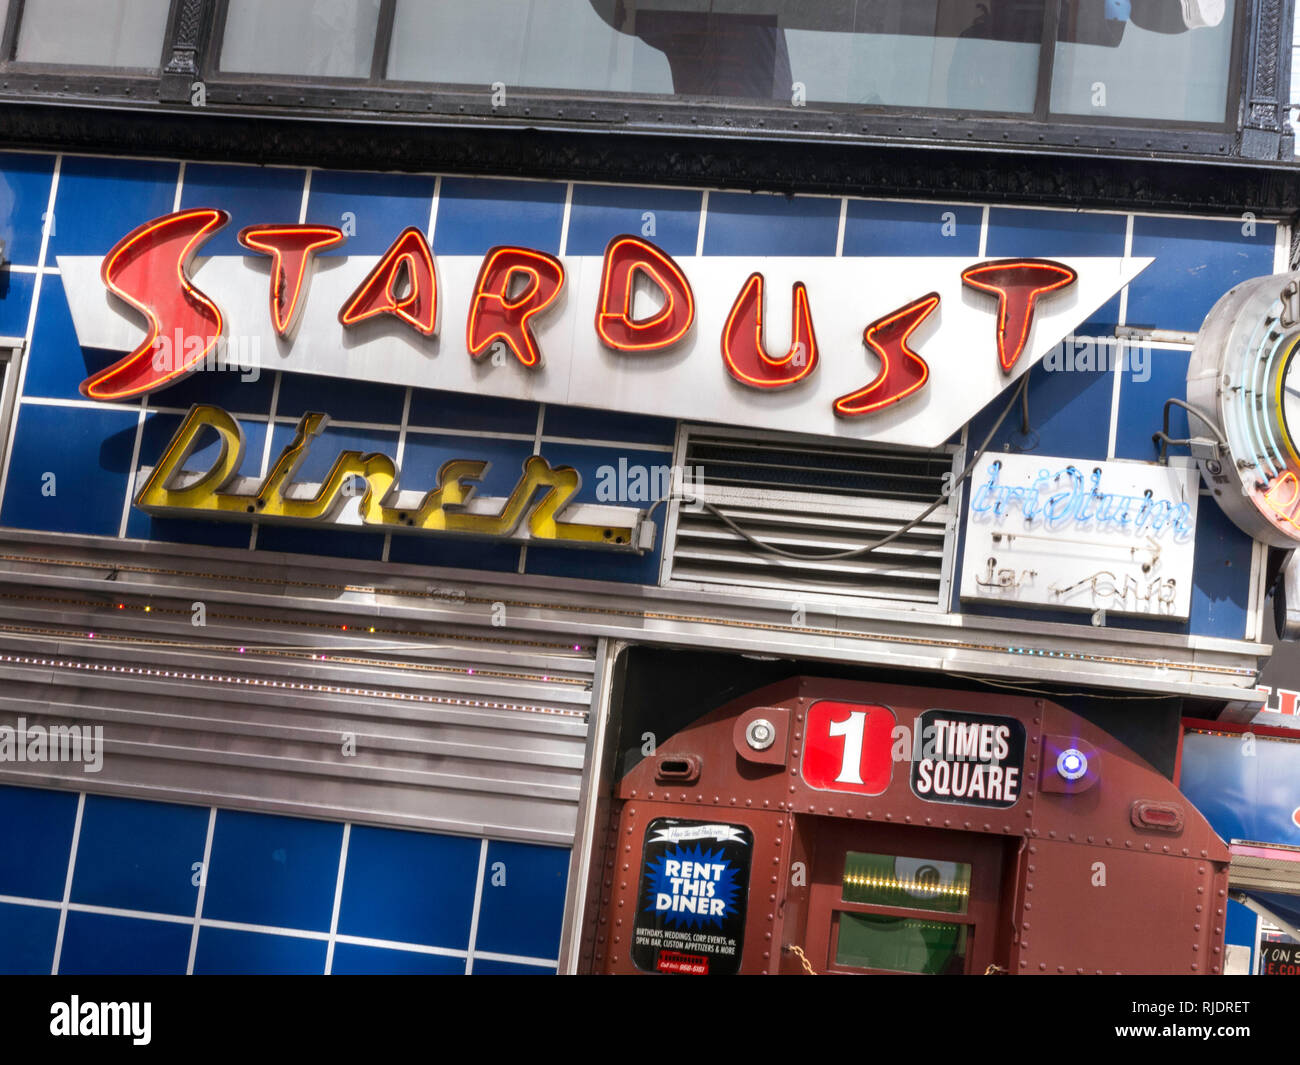 Stardust Diner Neon, Times Square, NYC, USA Stock Photo